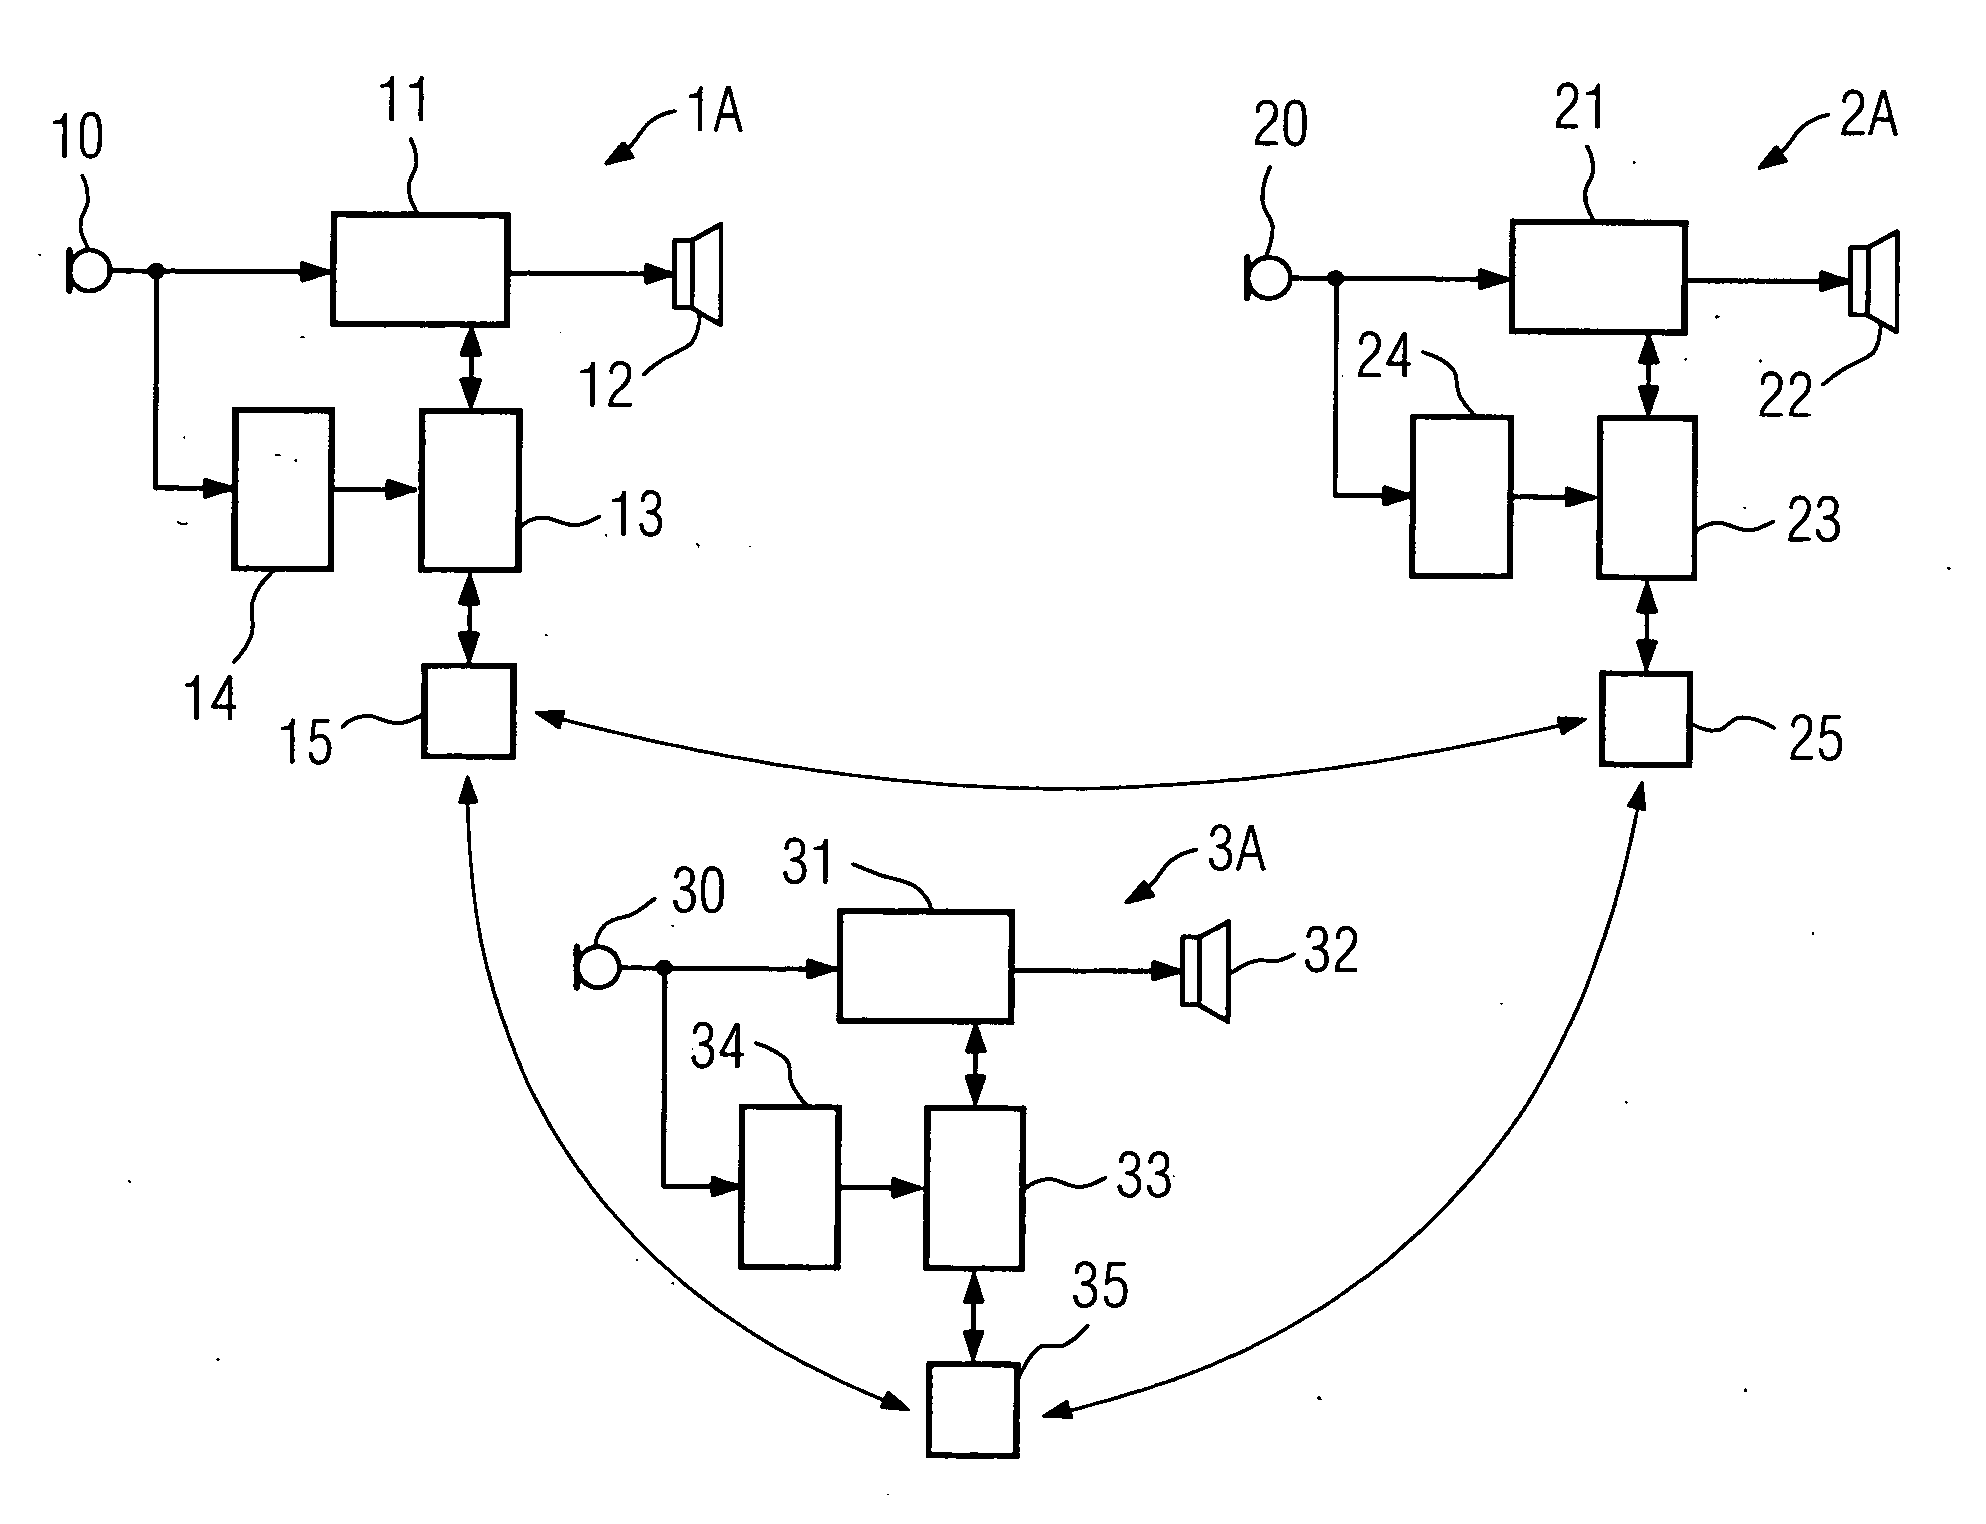 Method of operating a hearing aid system having at least two hearing aids